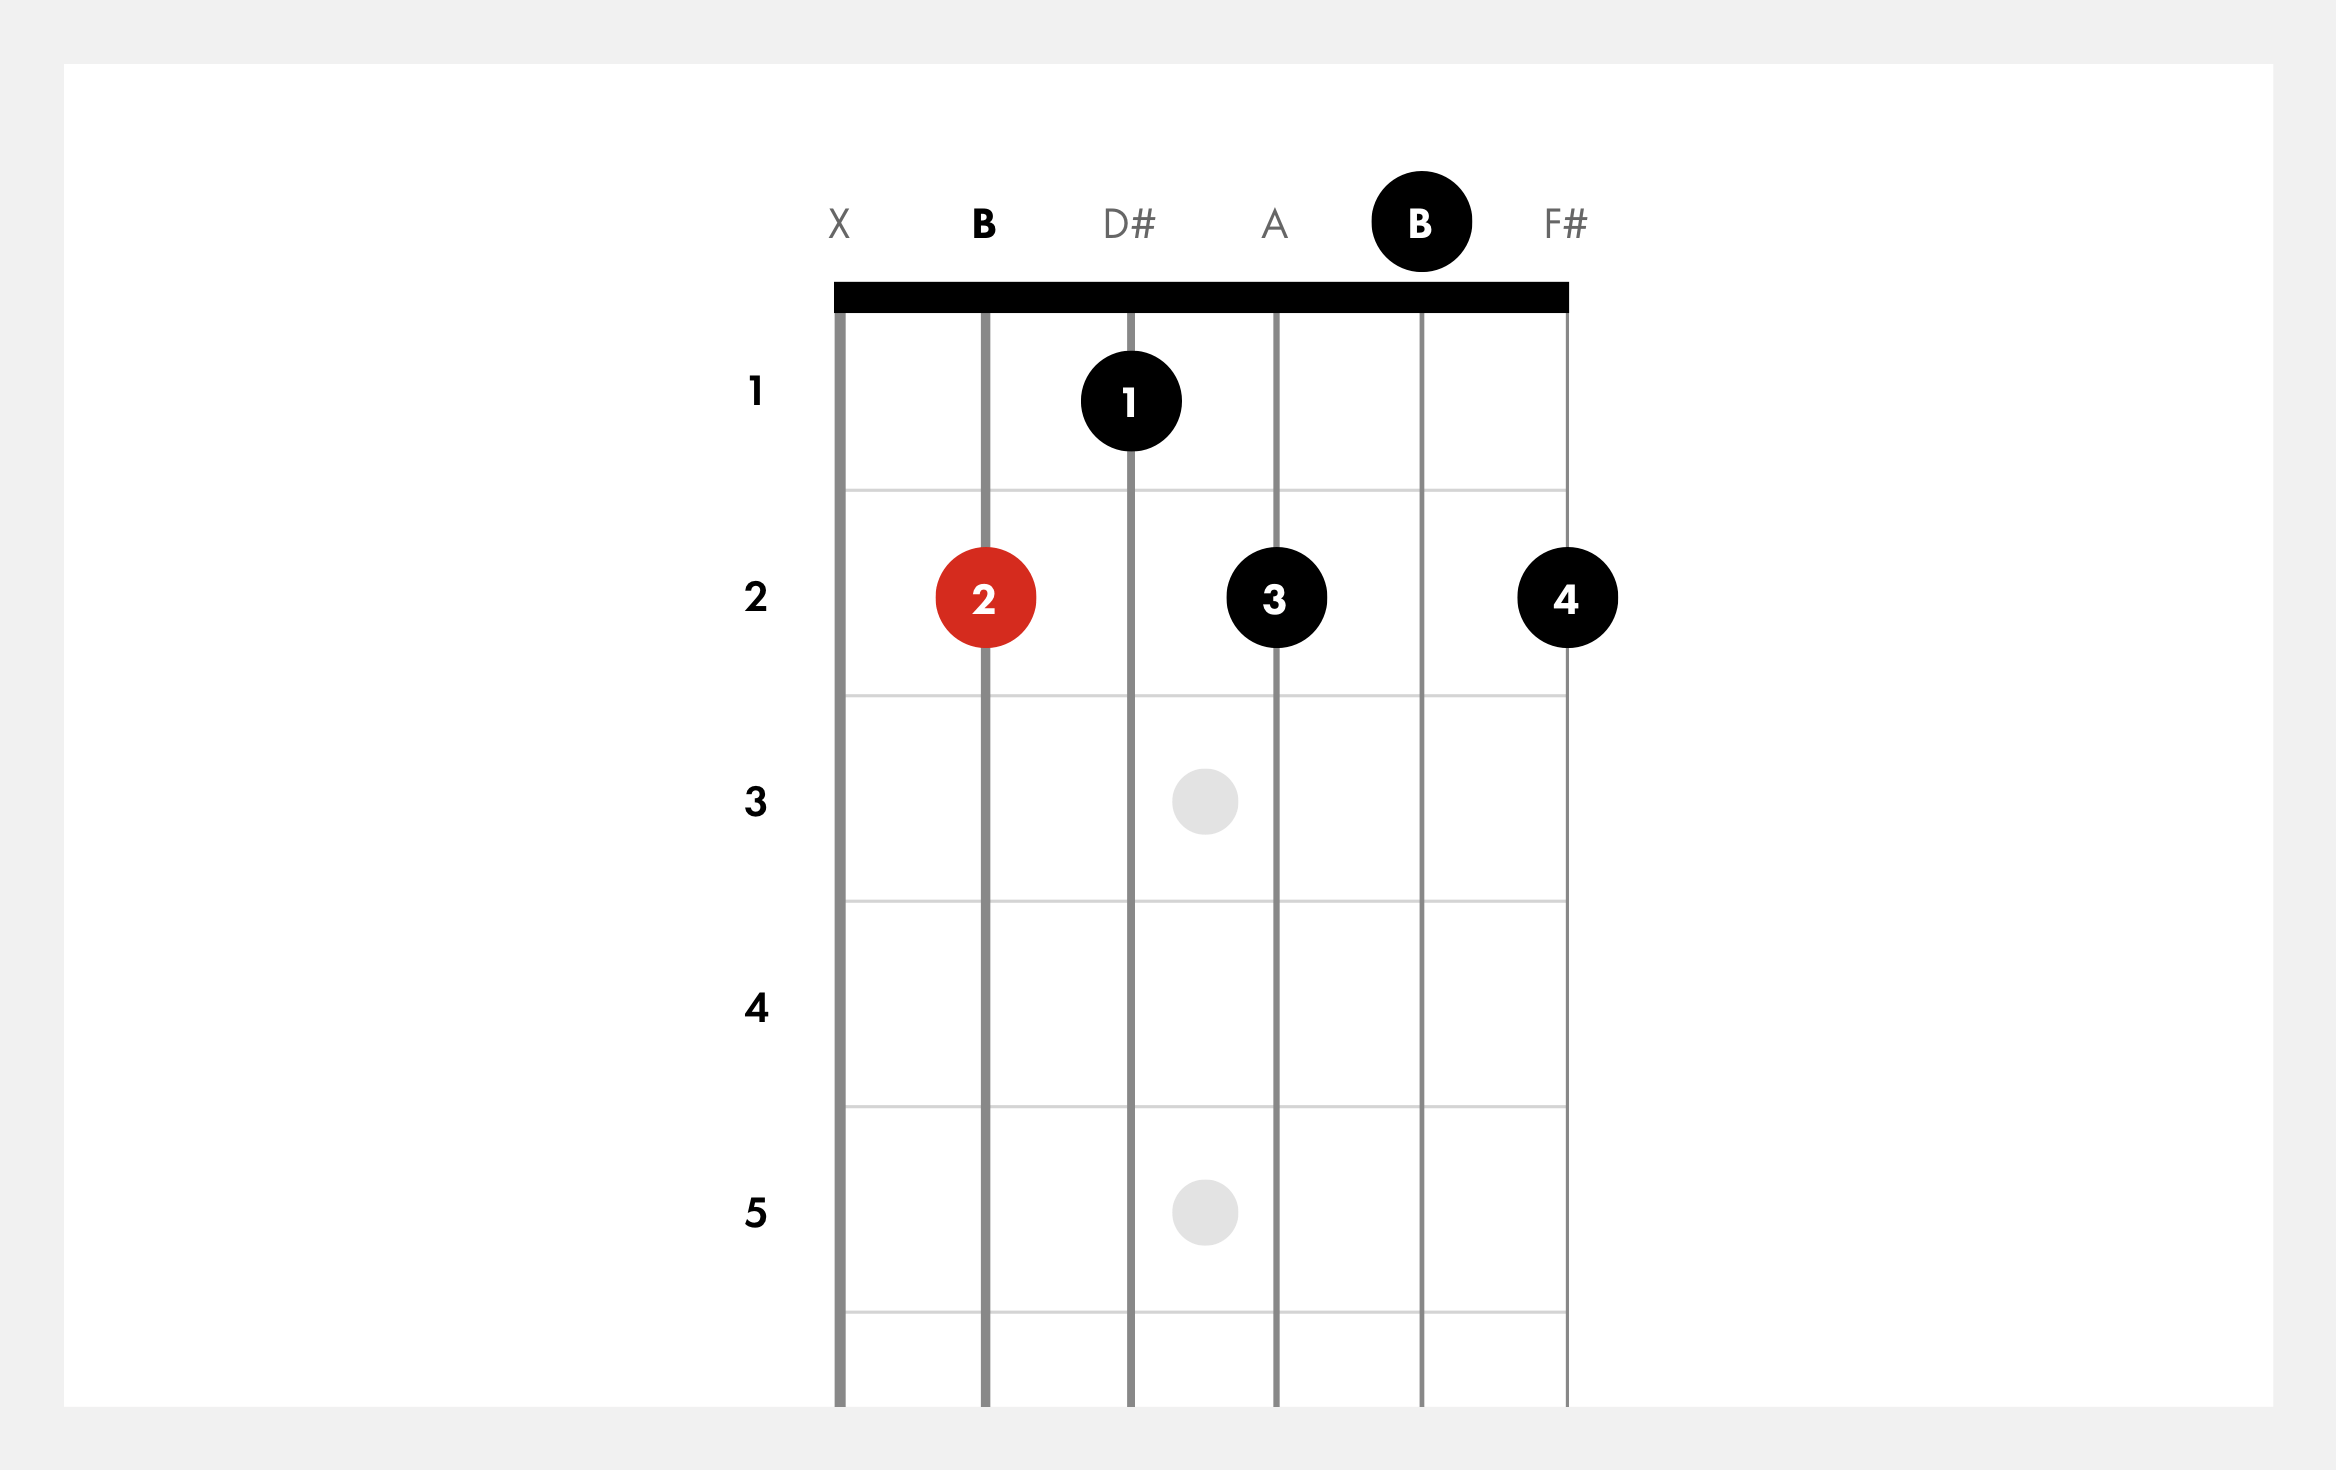 b7-chord-open-position@2x